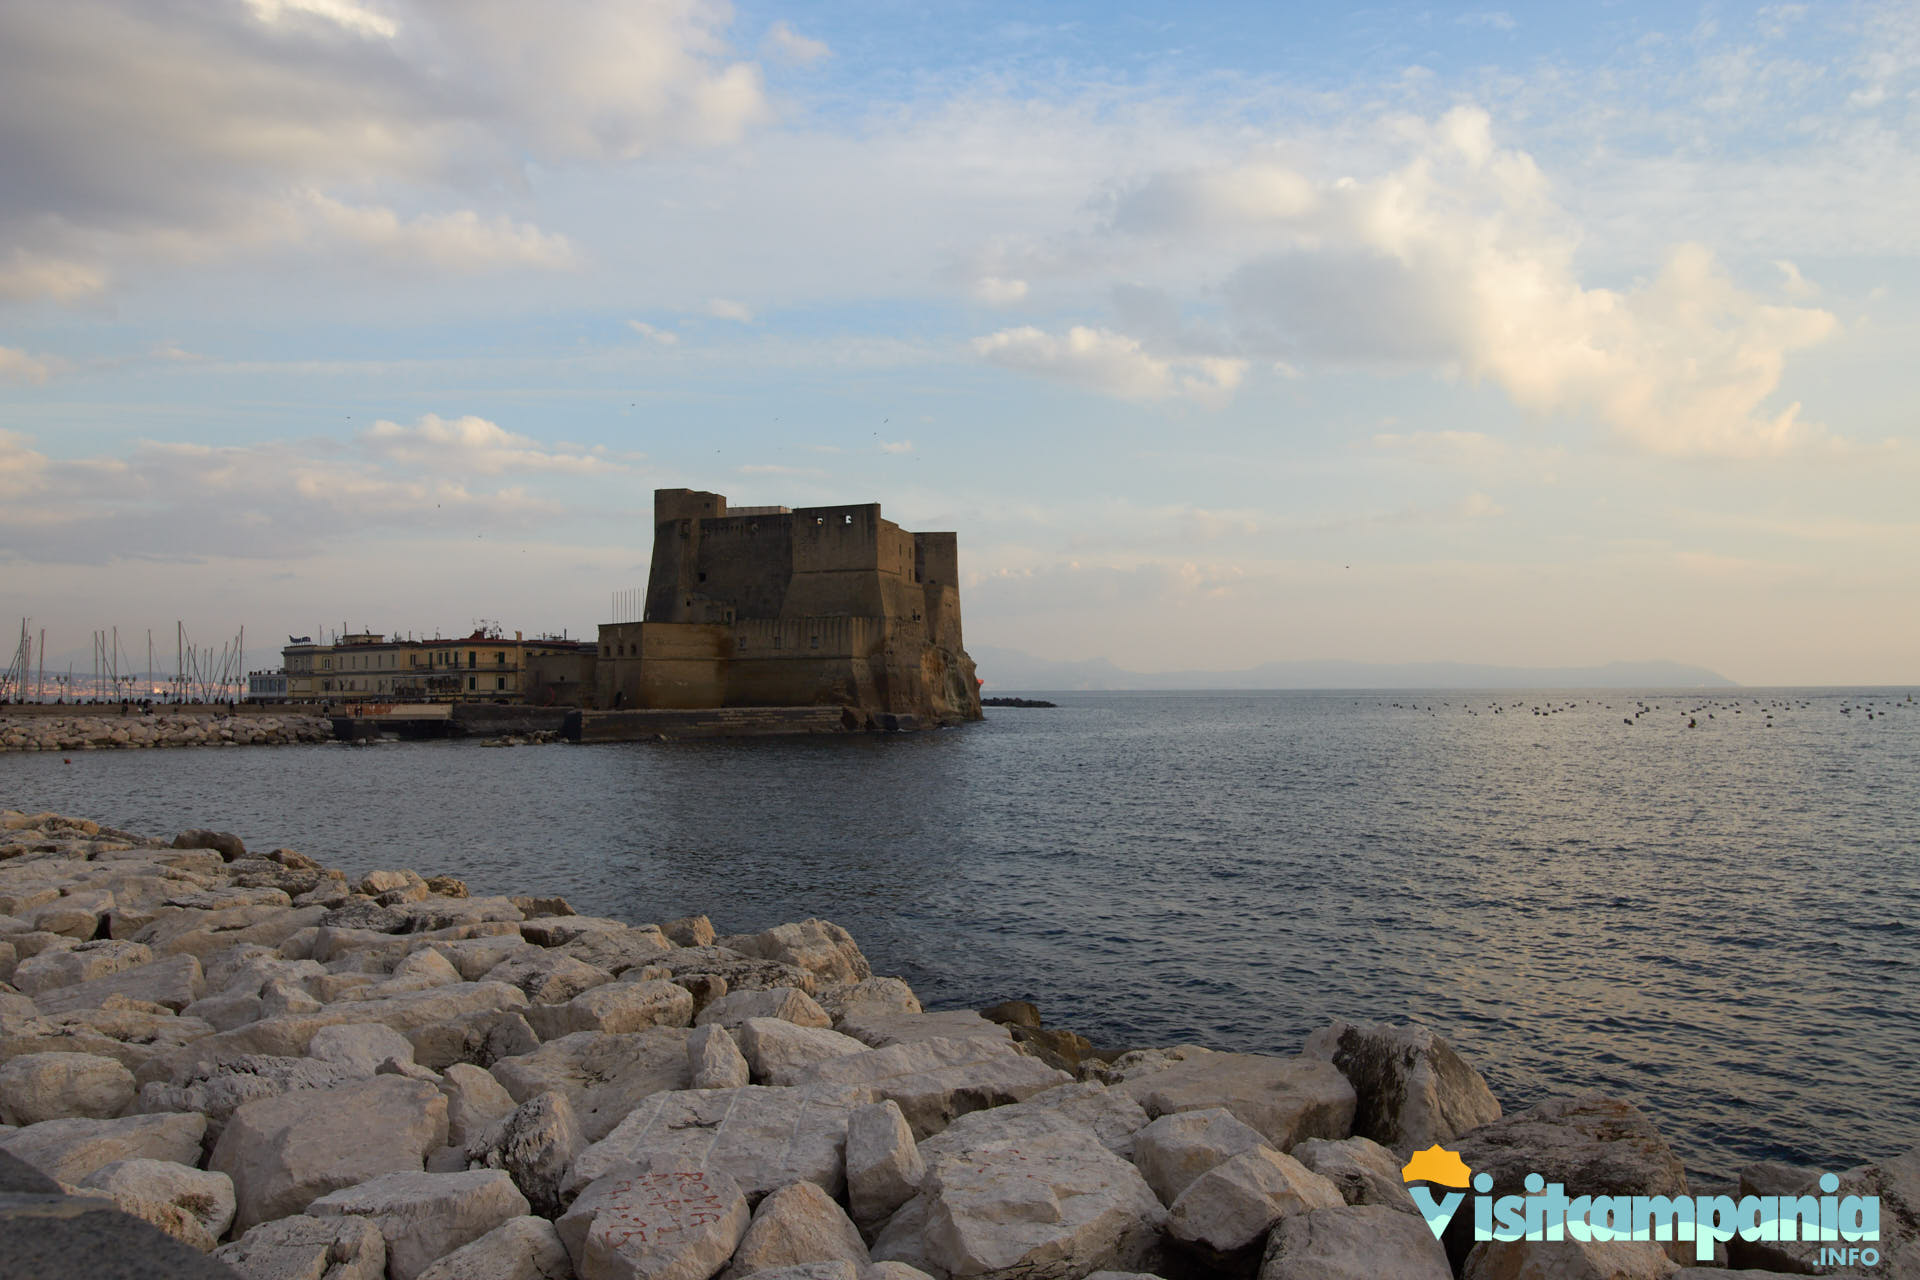 Castel dell'Ovo is located on the ancient island of Megaride in Naples